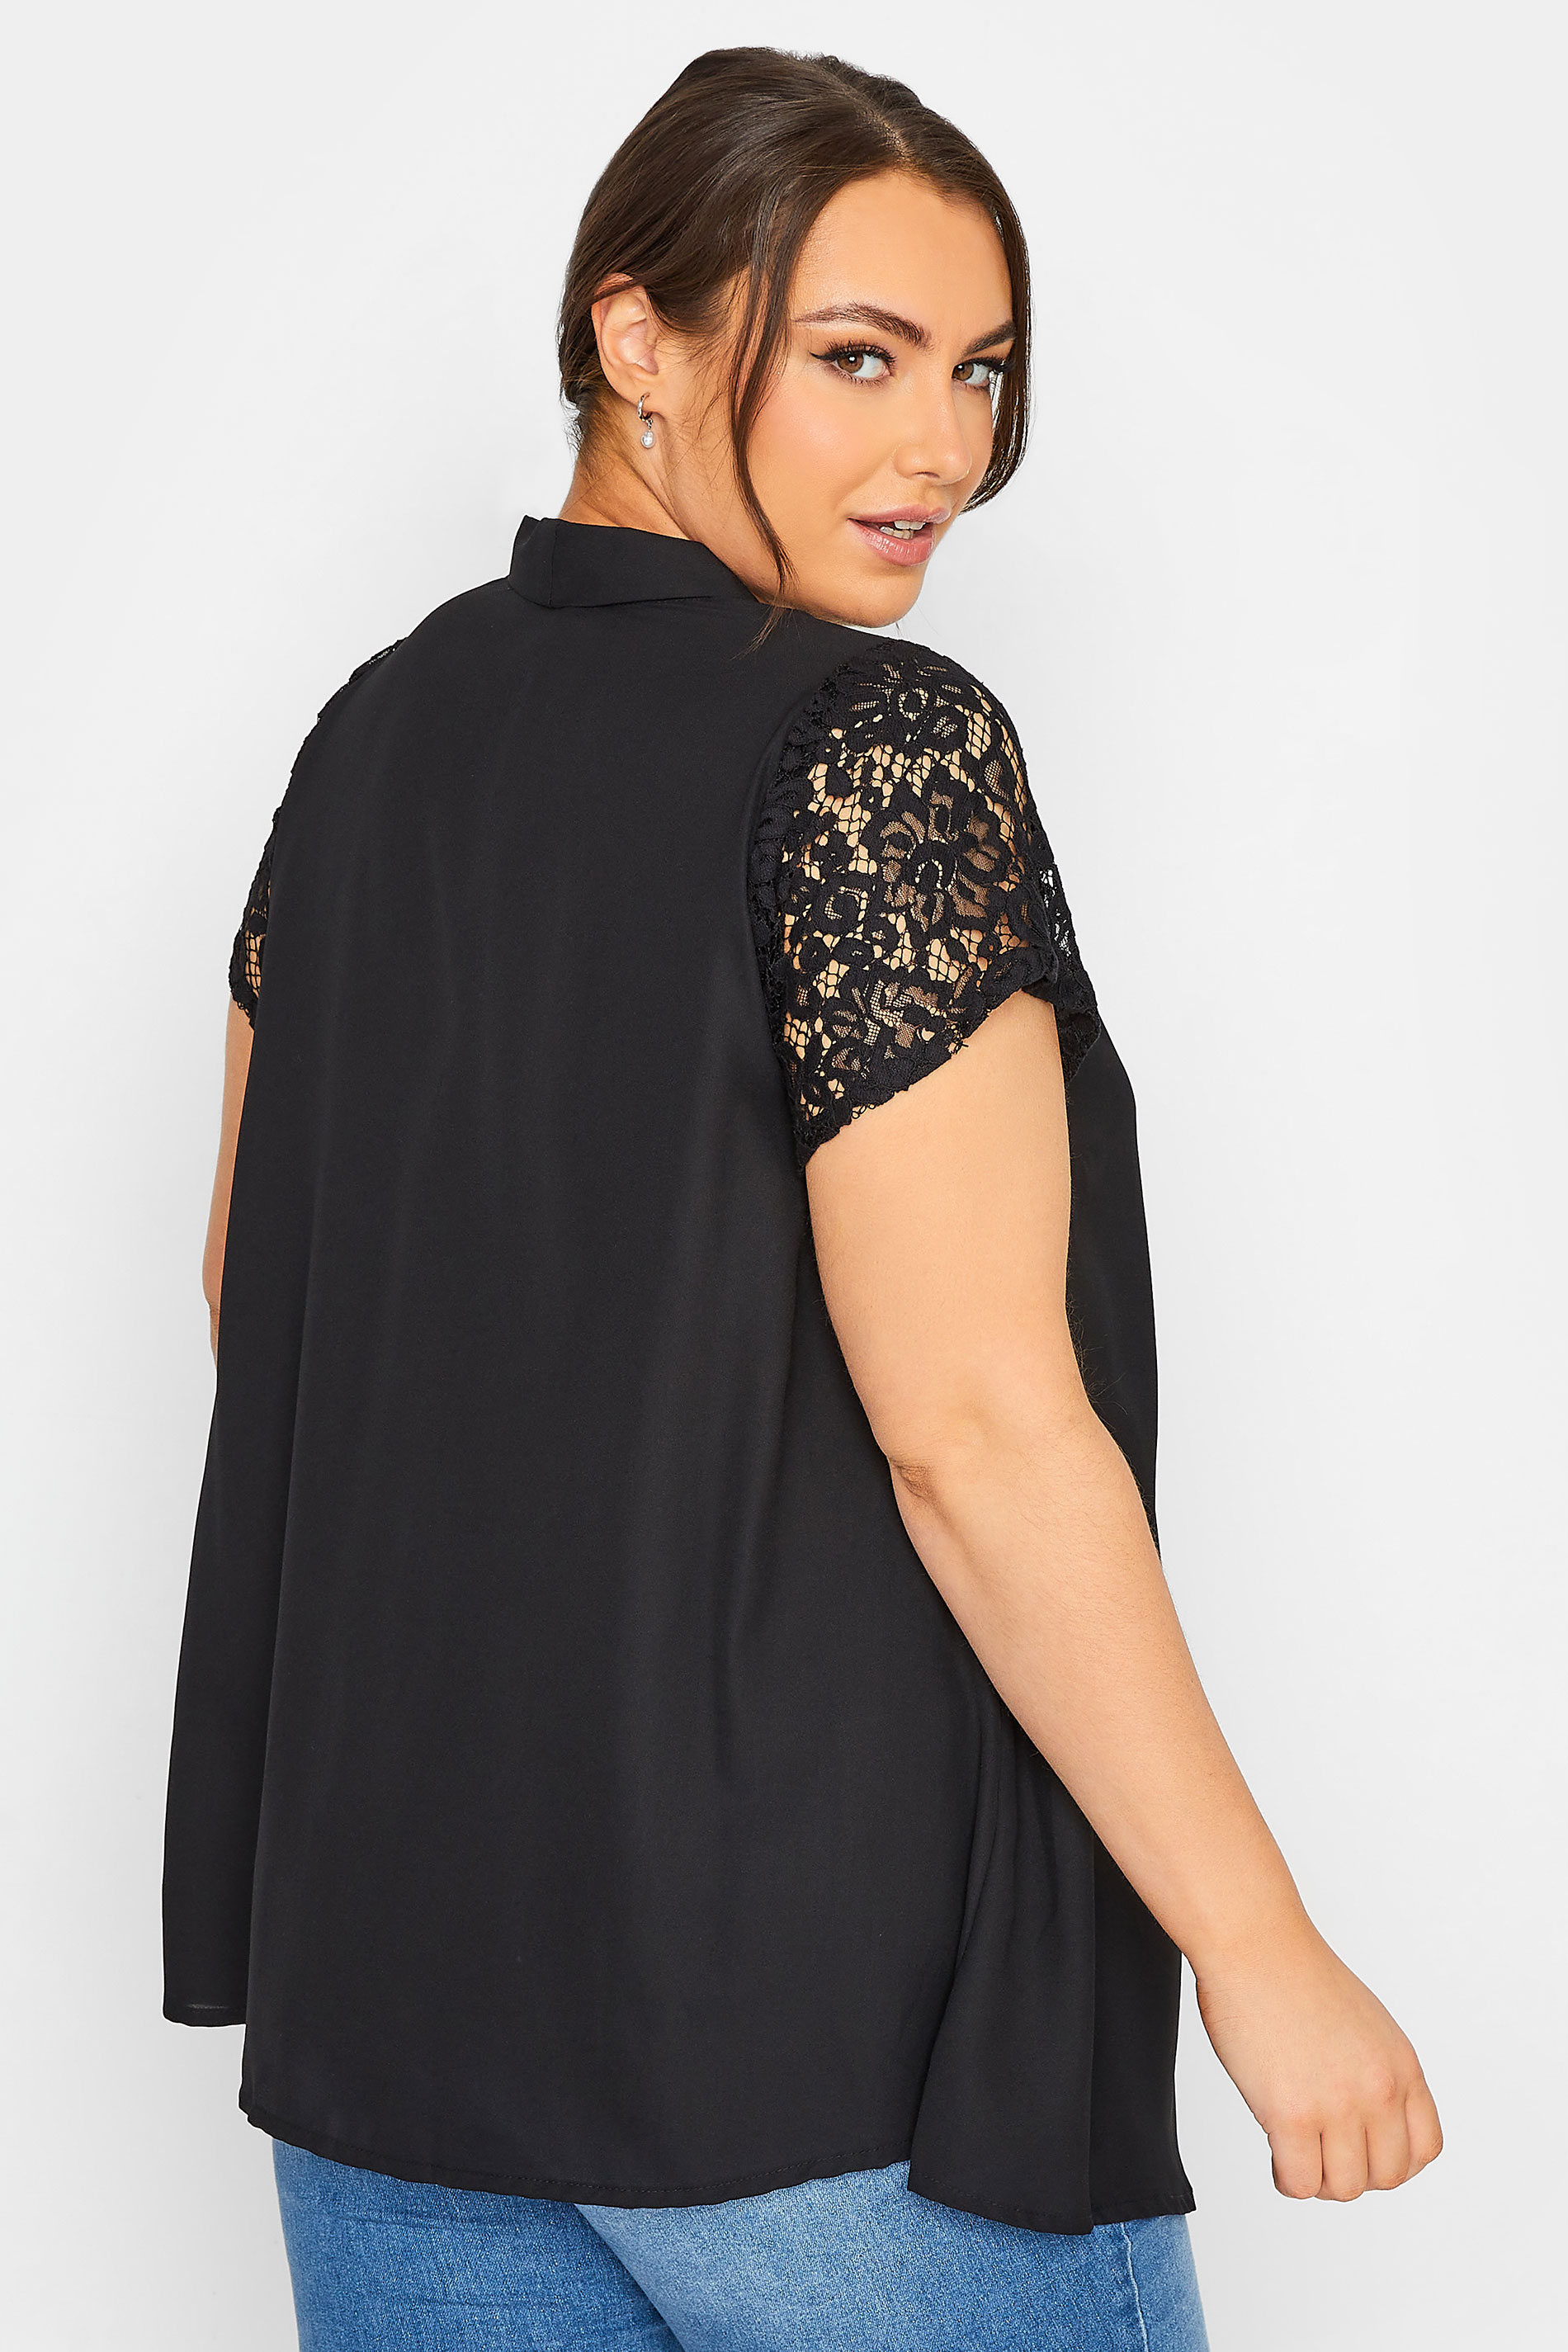 LIMITED COLLECTION Plus Size Black Lace Insert Blouse | Yours Clothing 3